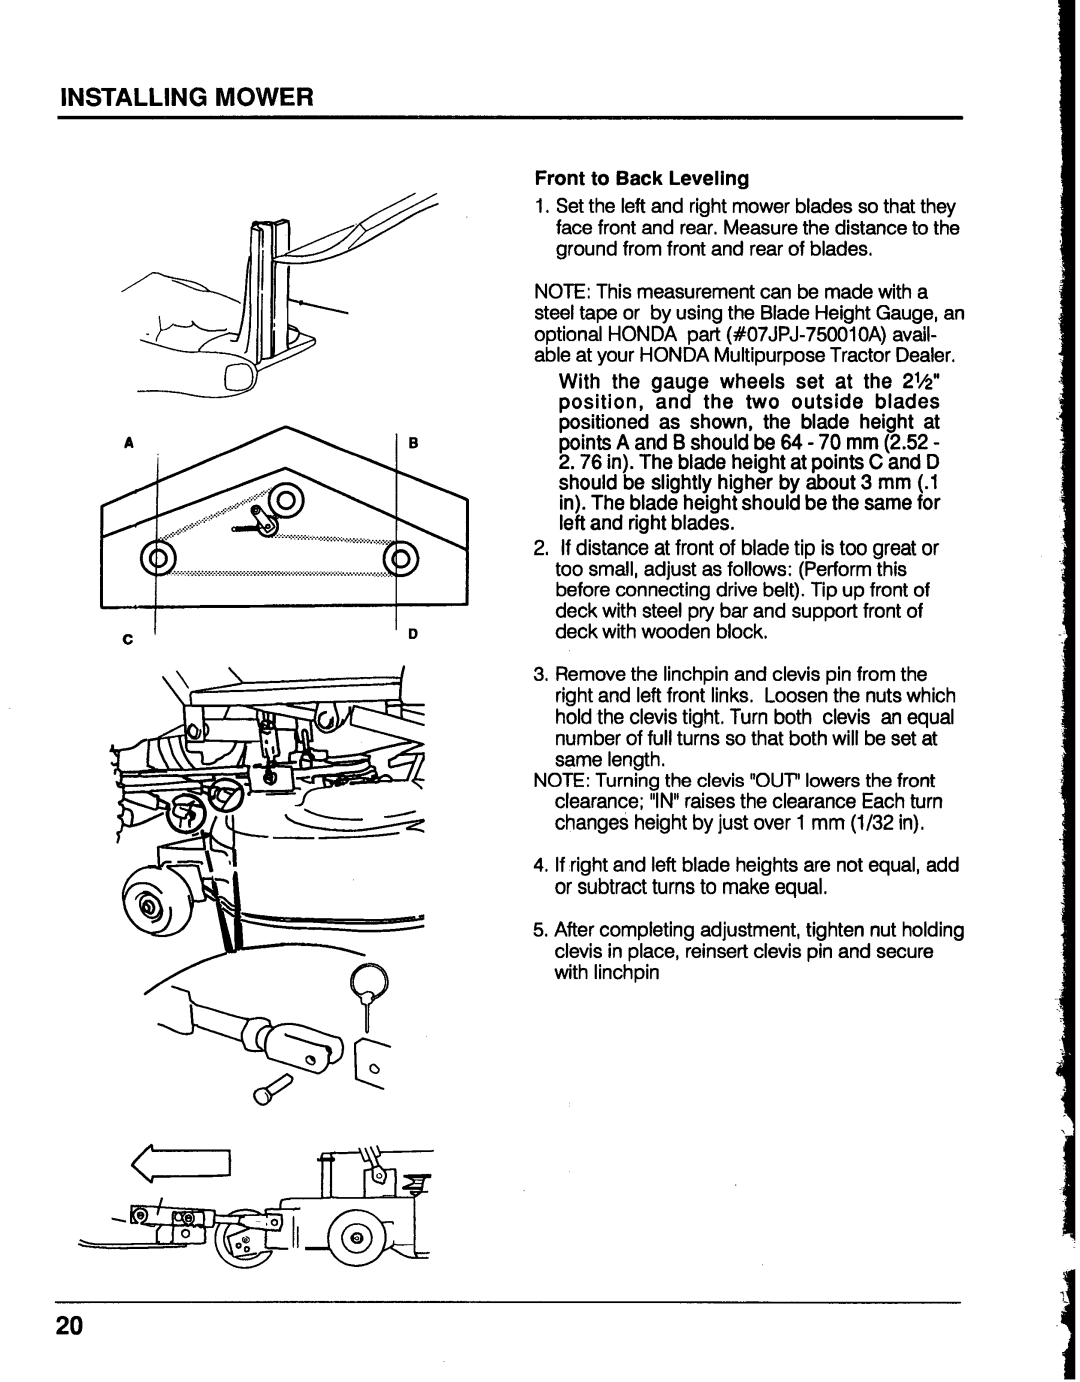 Honda Power Equipment MM52 manual Front to Back Leveling 